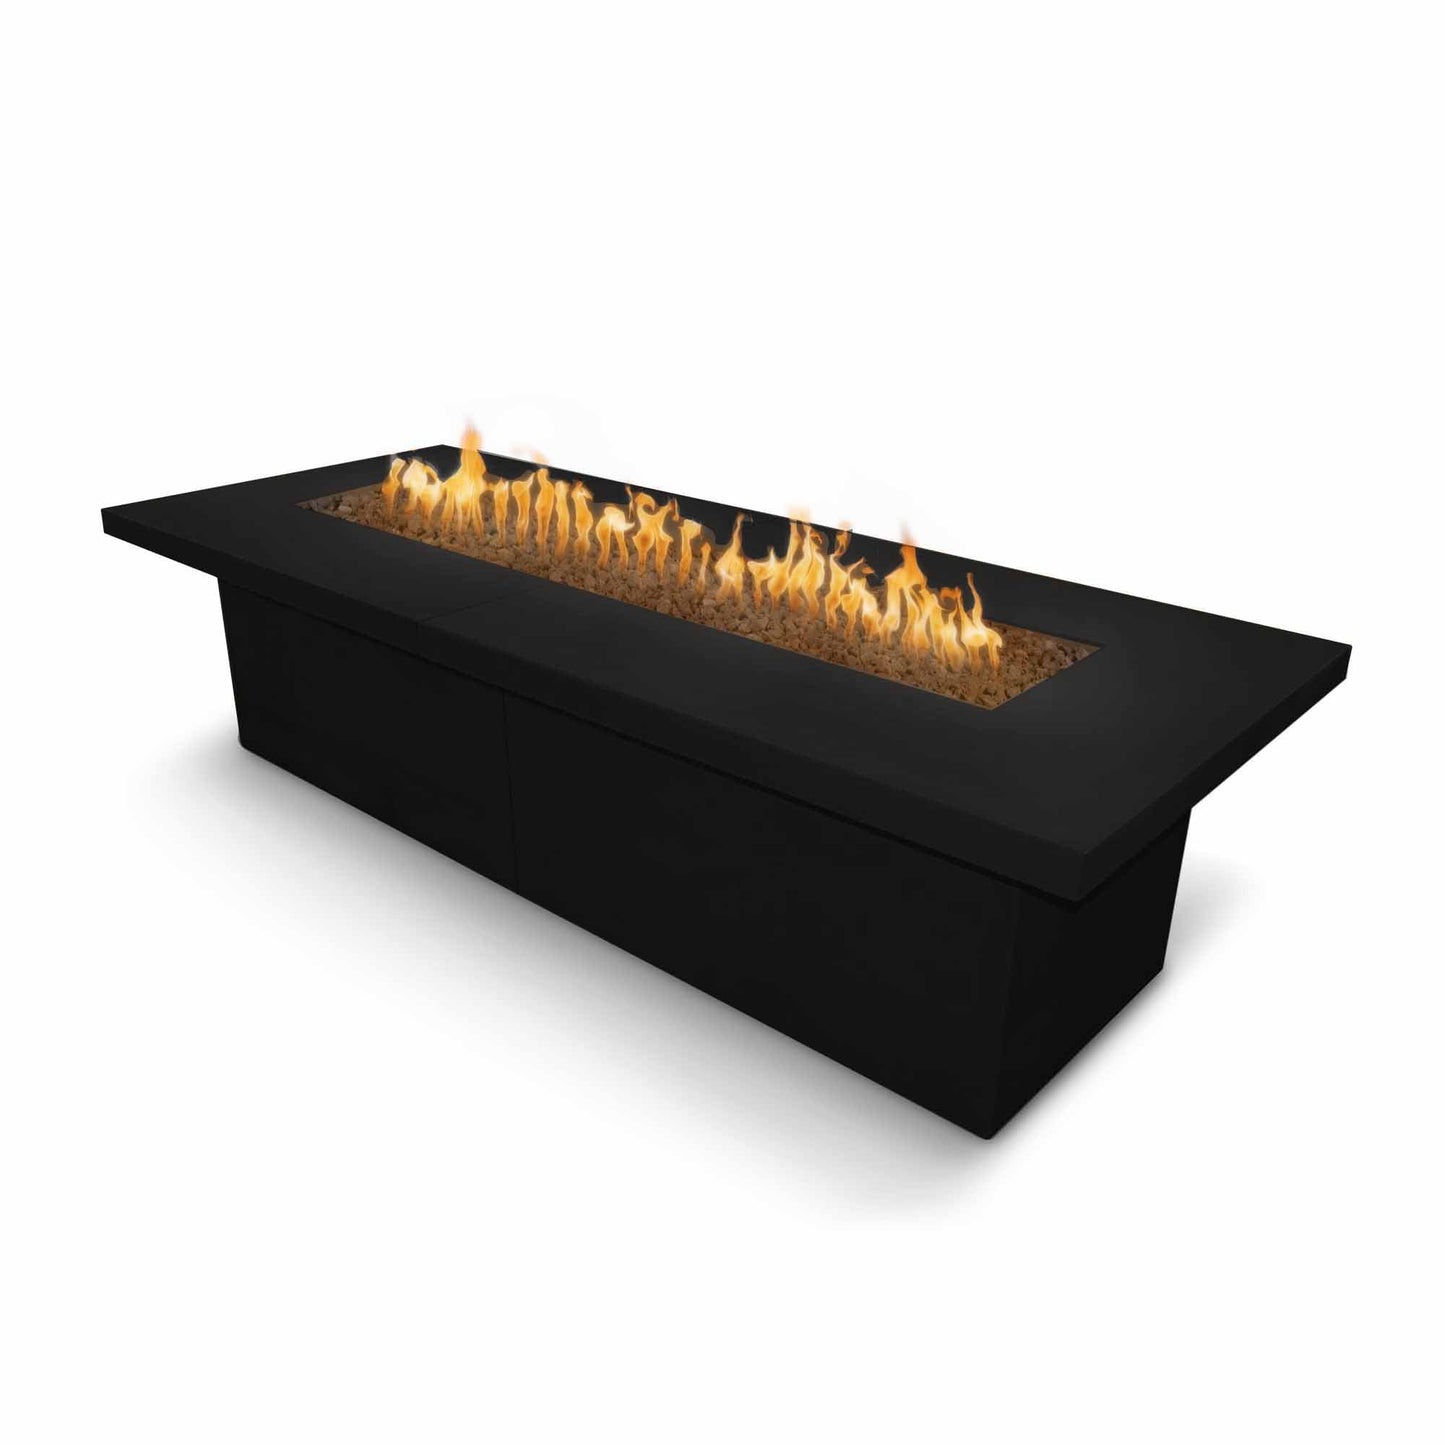 The Outdoor Plus Rectangular Newport 72" Hammered Copper Natural Gas Fire Pit with Flame Sense with Spark Ignition